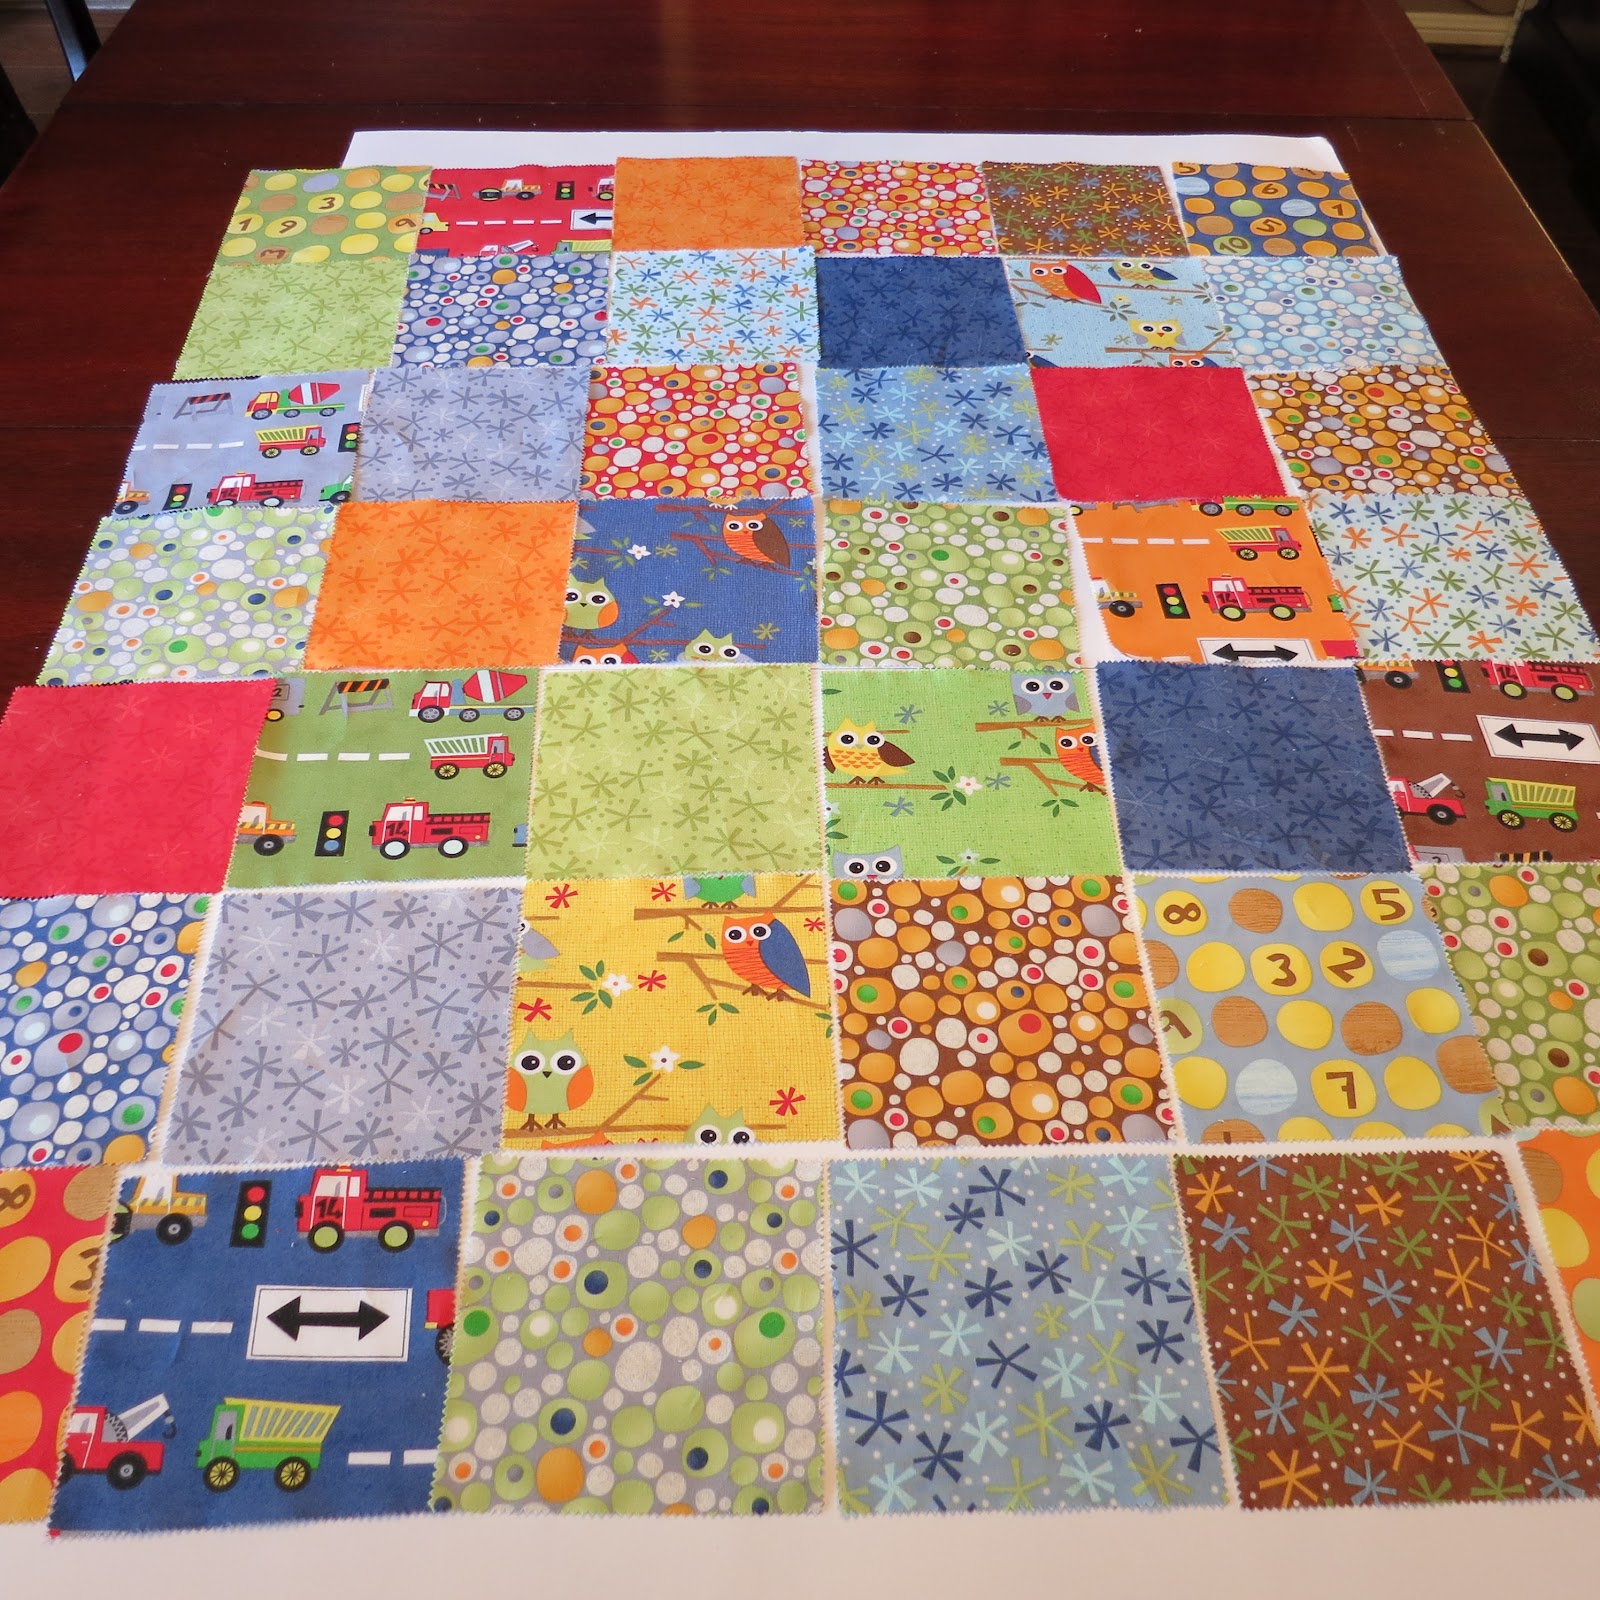 Simple Charm Pack Baby Quilt Pattern - Free Four Square Quilt Pattern